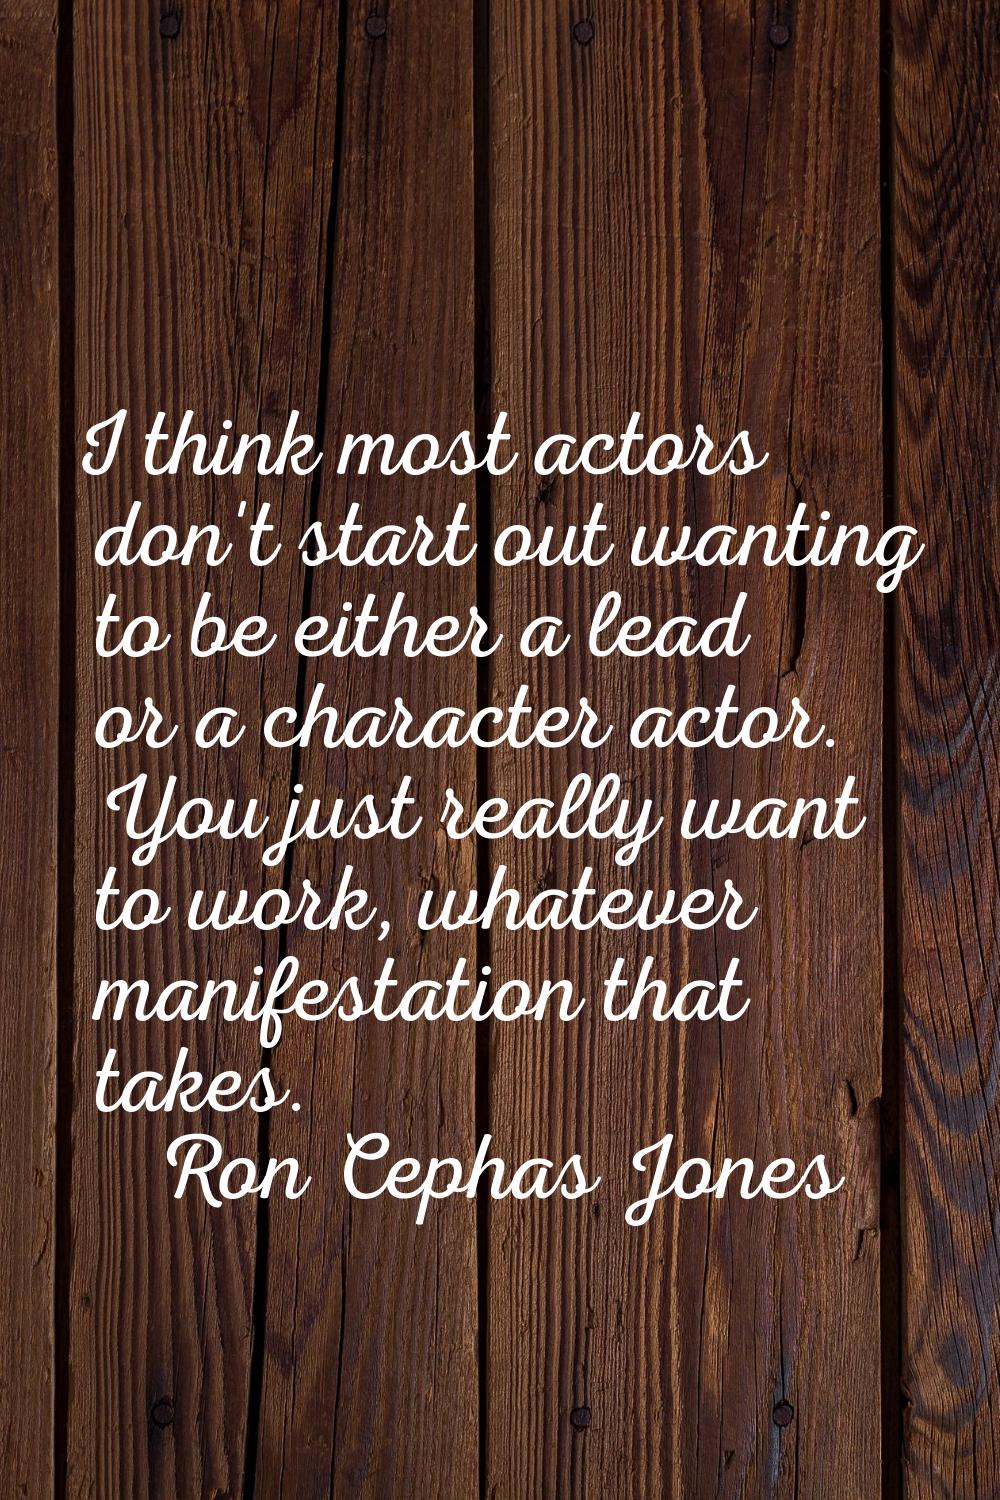 I think most actors don't start out wanting to be either a lead or a character actor. You just real